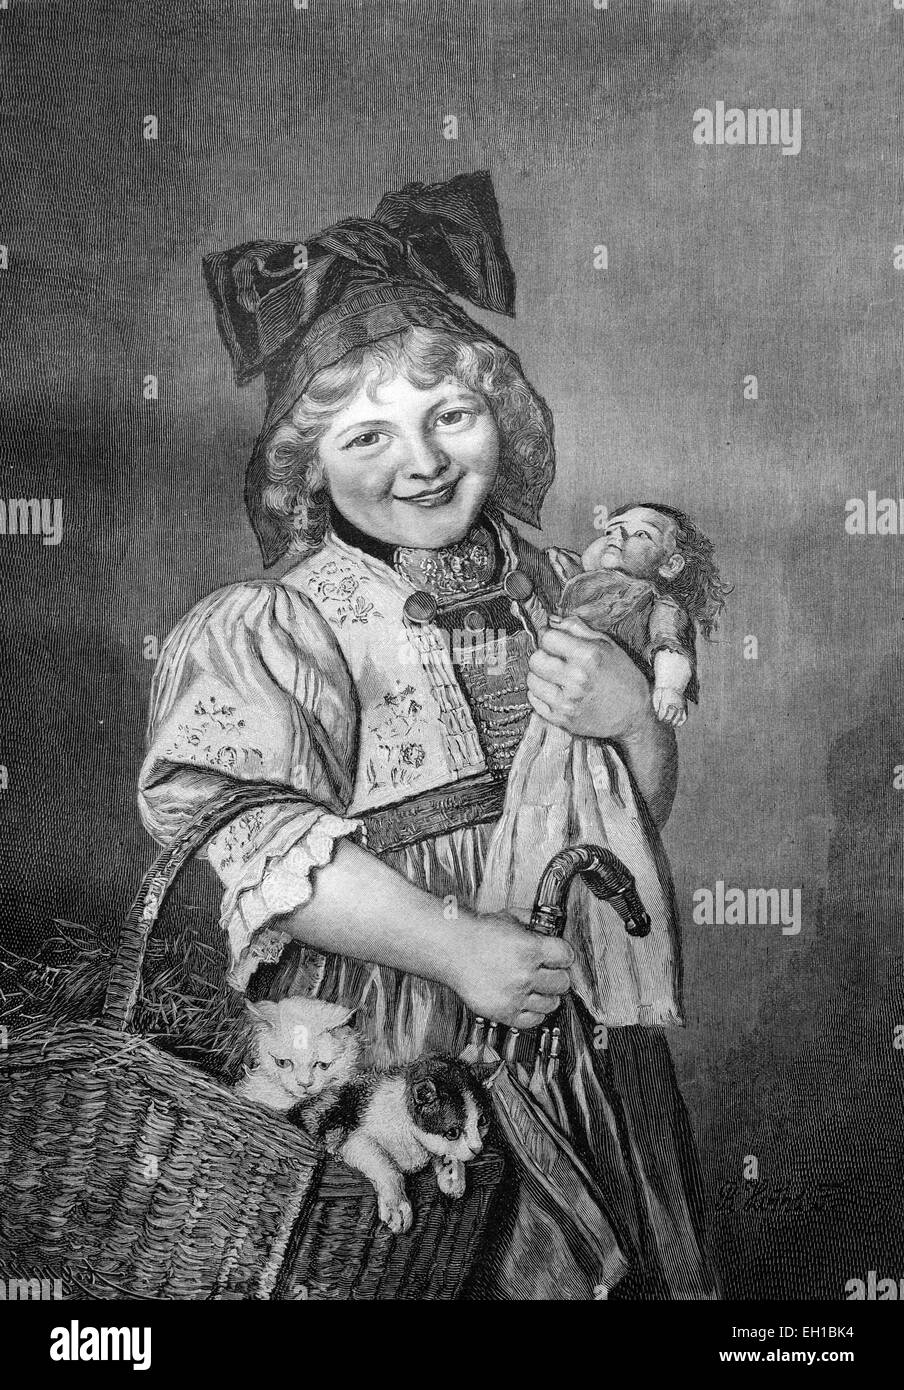 Child ready for a trip, with umbrella, puppet and basket with cats, historical illustration circa 1893 Stock Photo